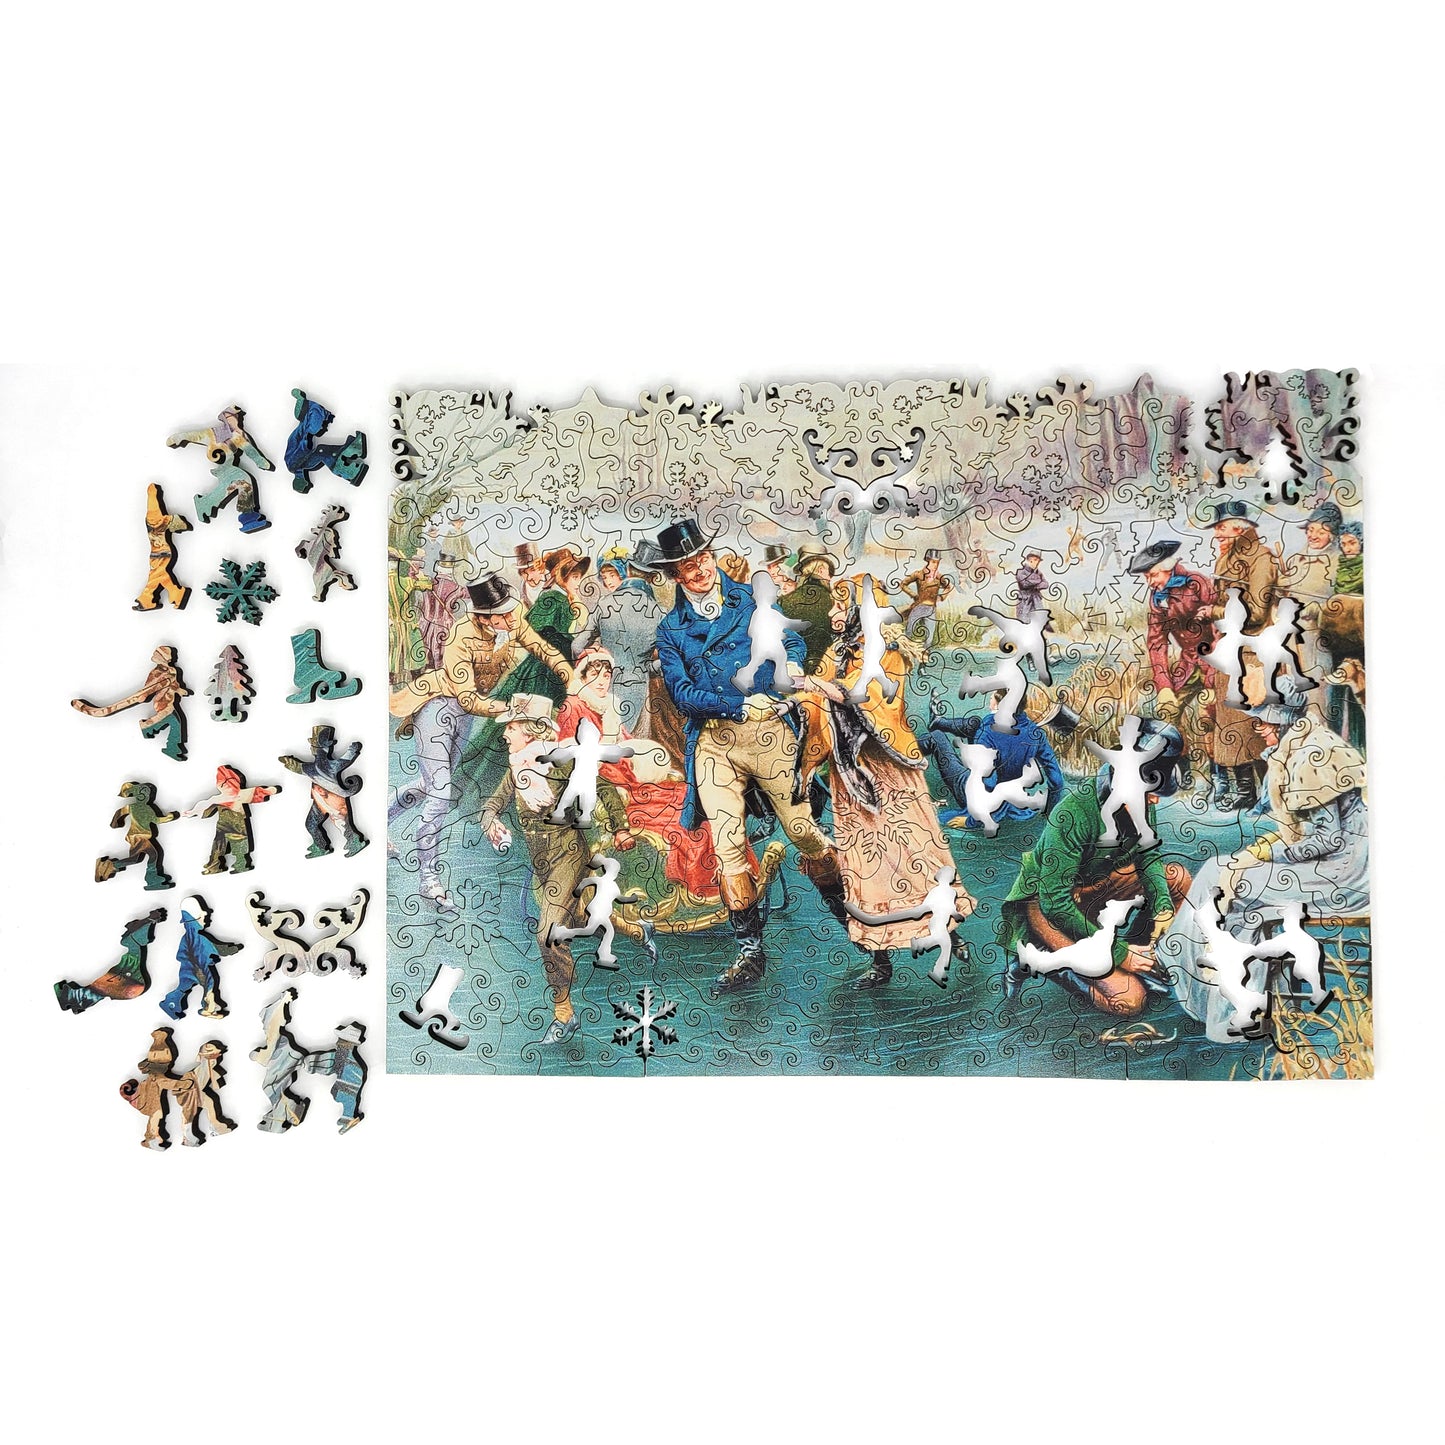 Wooden Jigsaw Puzzle with Uniquely Shaped Pieces for Adults - 255 Pieces - A Merry Christmas